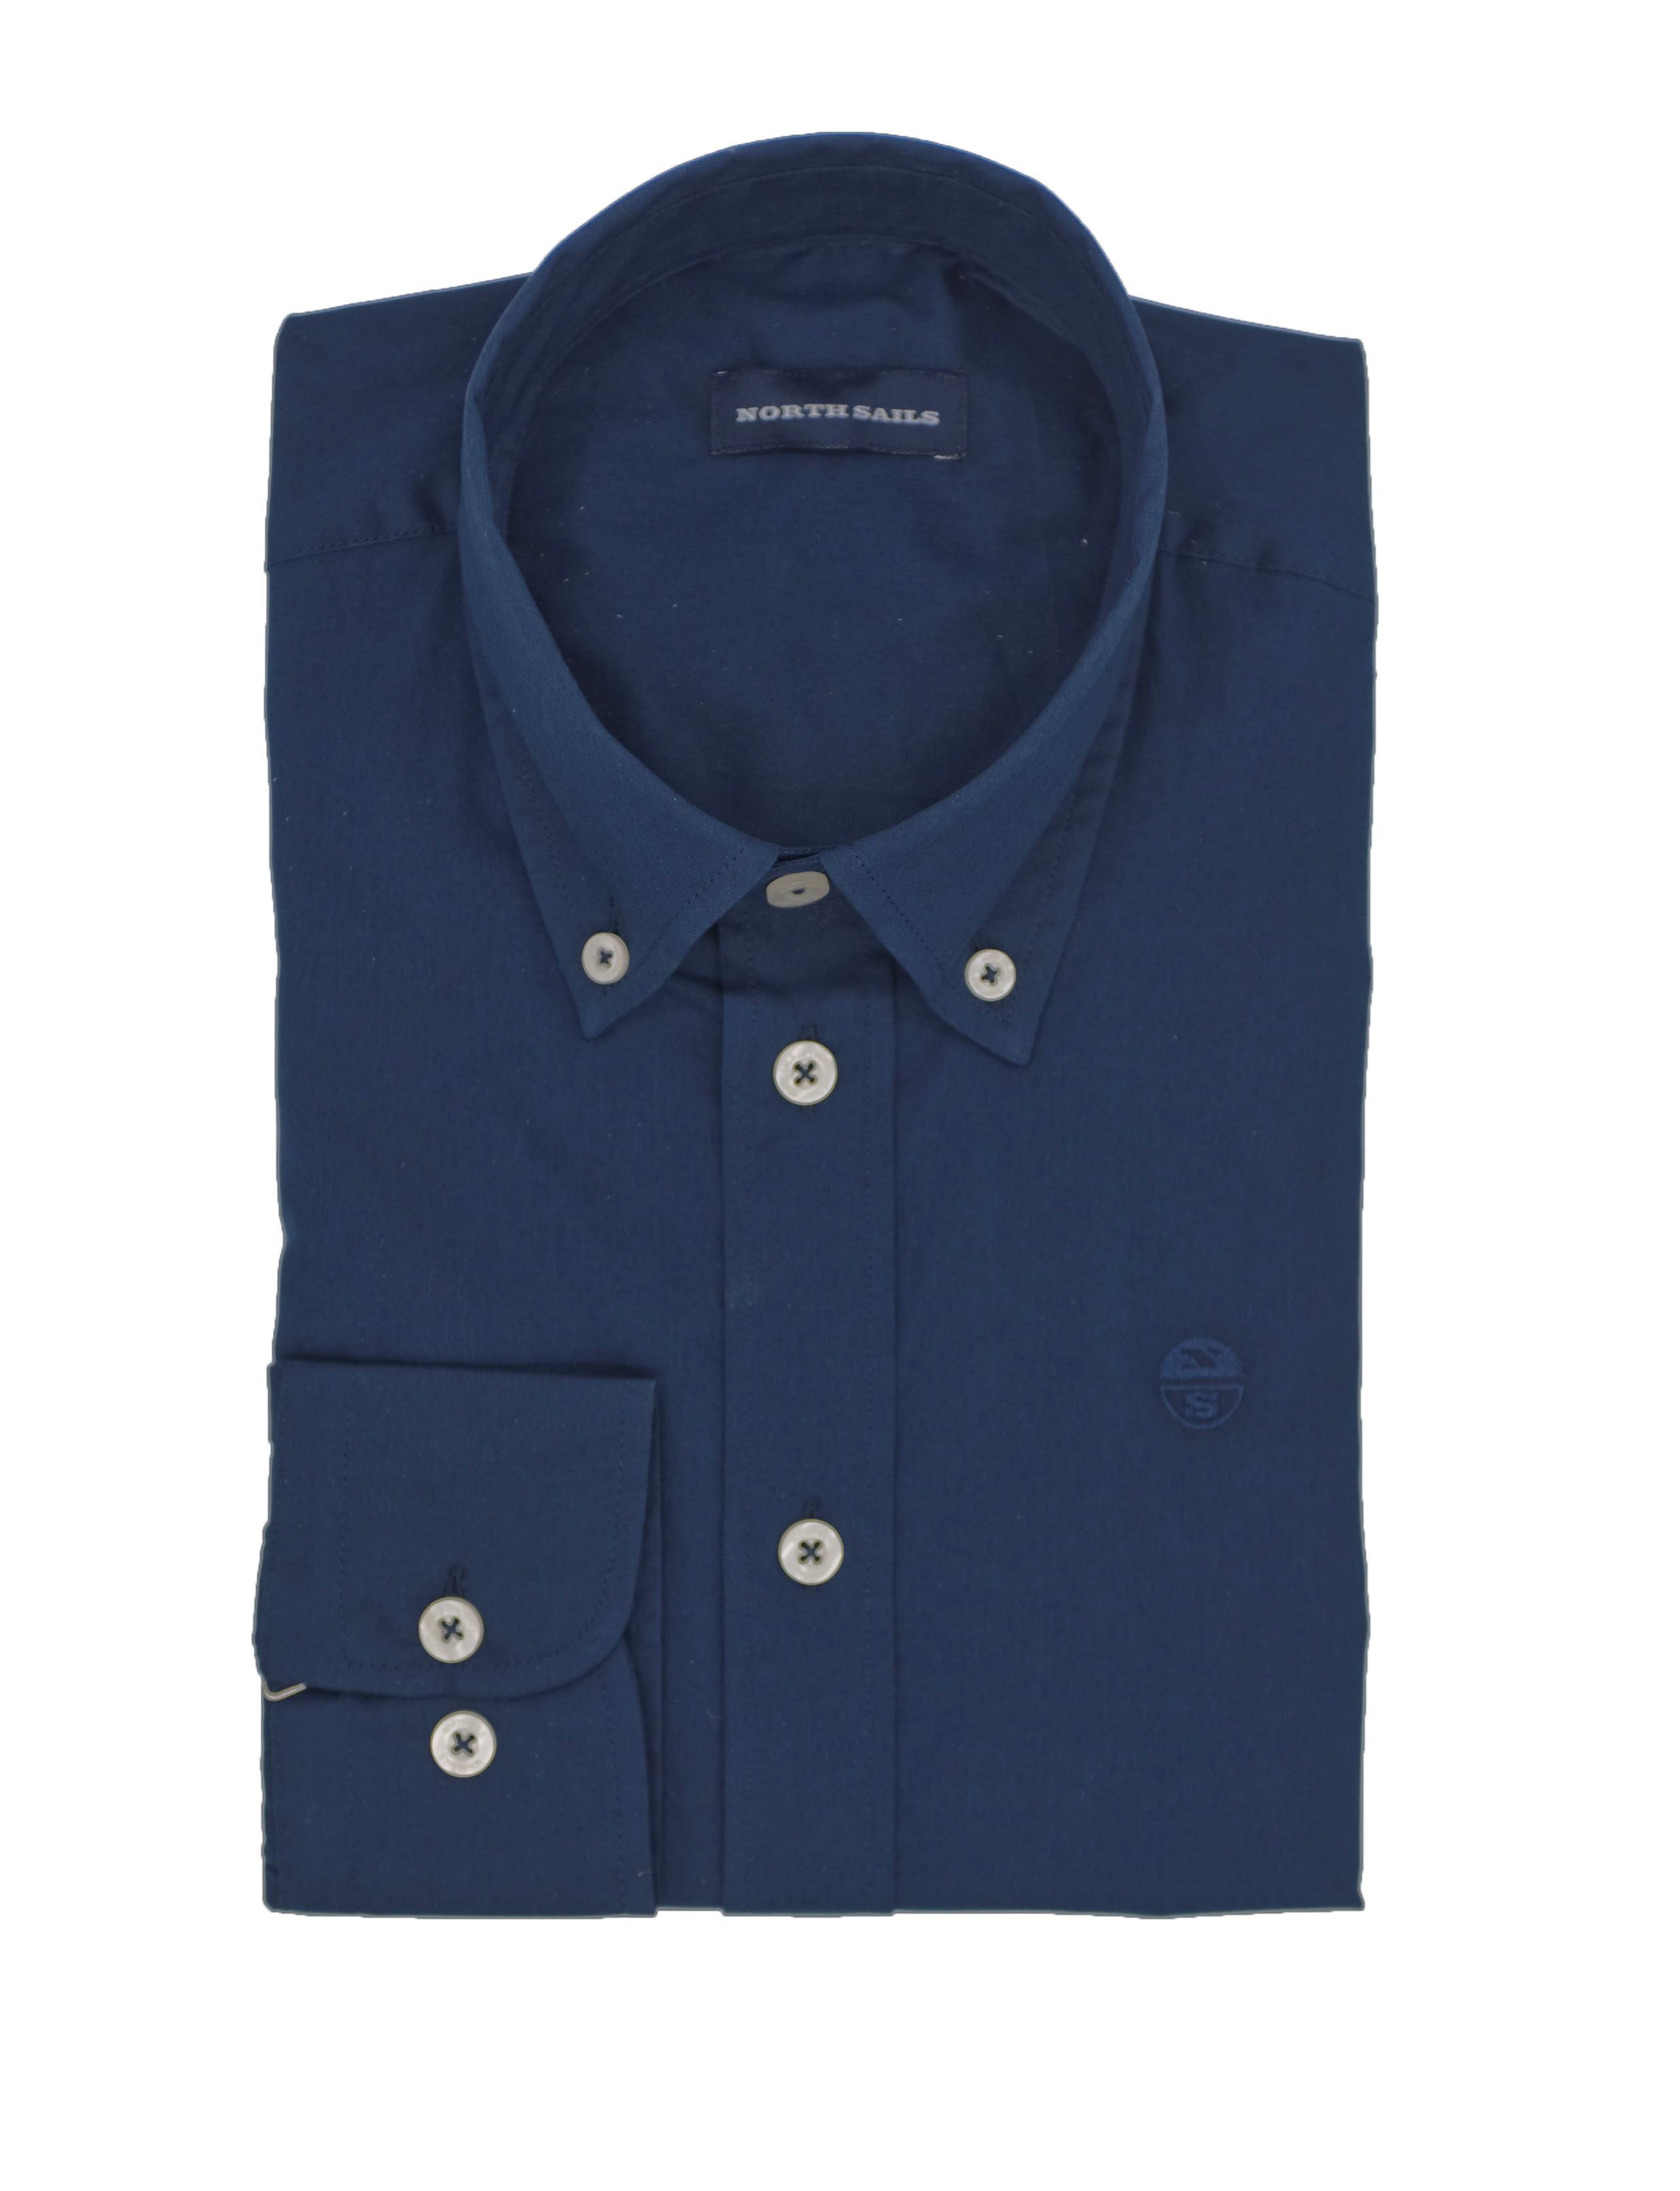 Picture of Navy blue button-down shirt